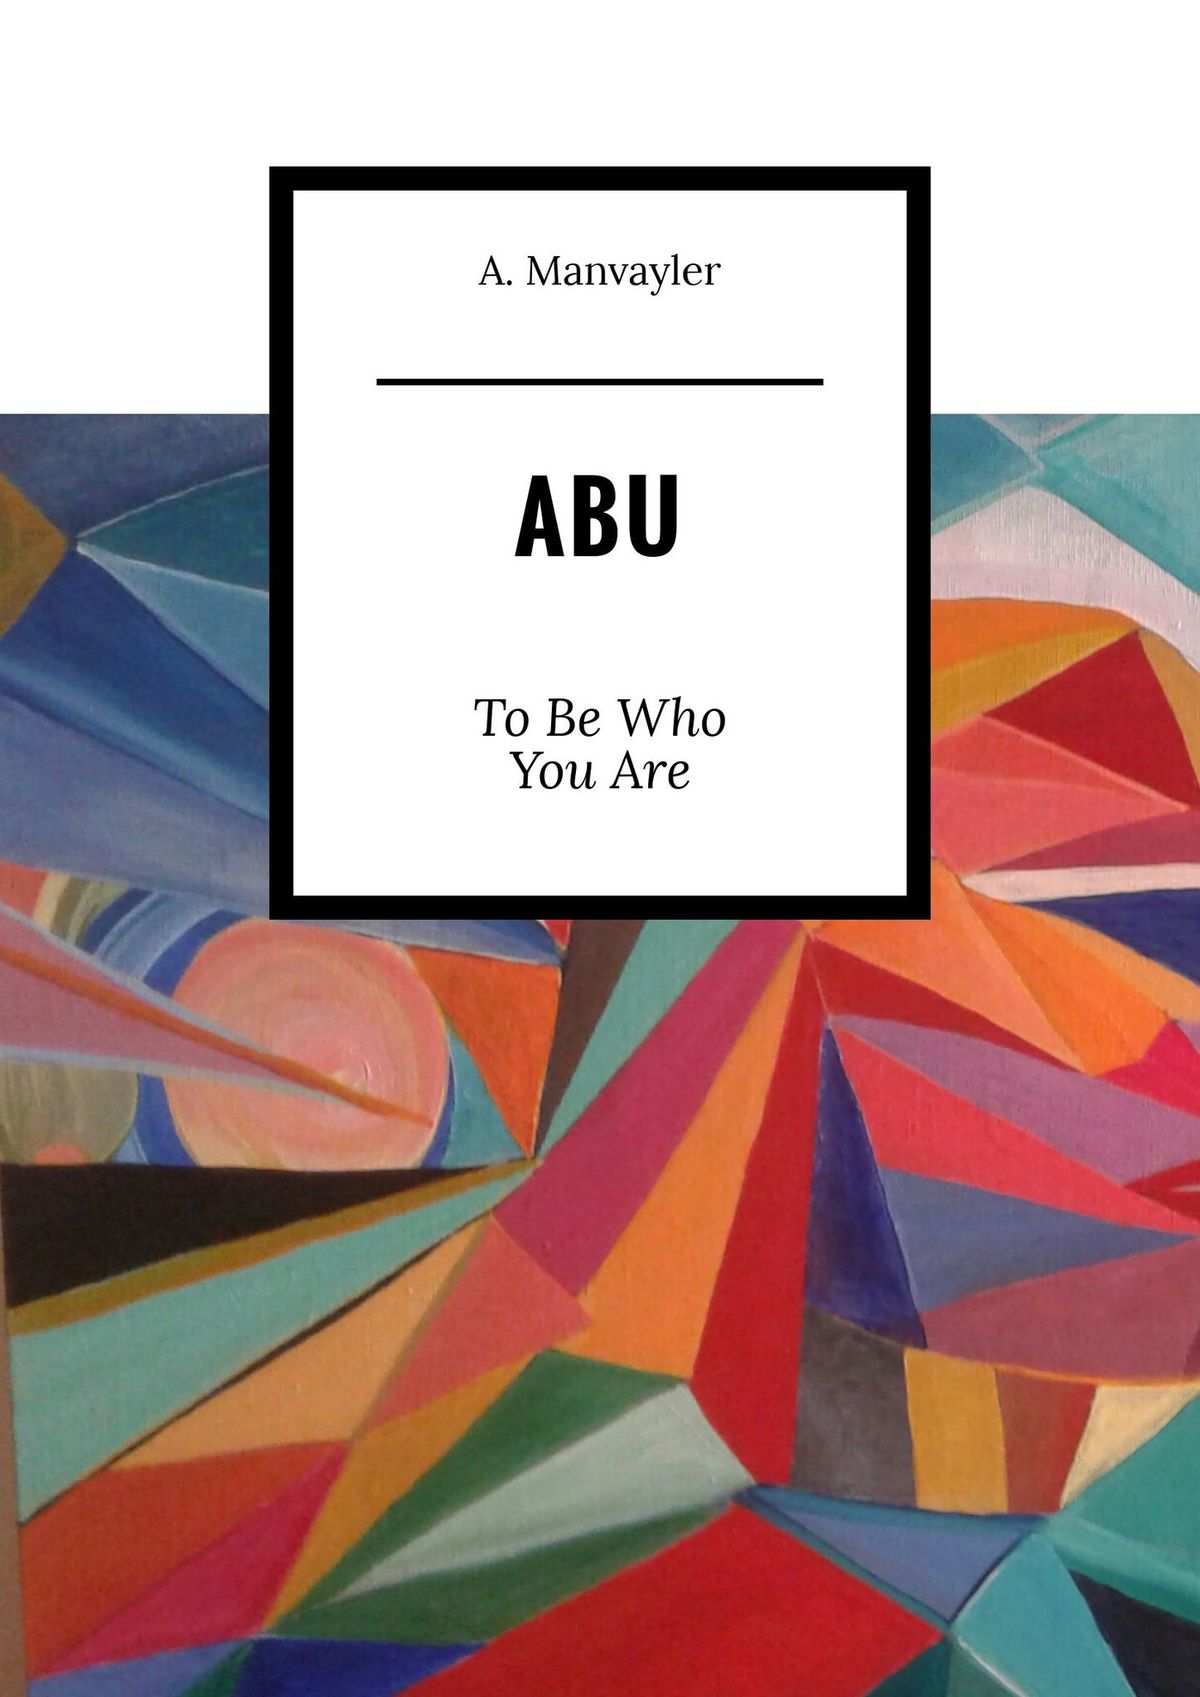 Abu. To Be Who You Are